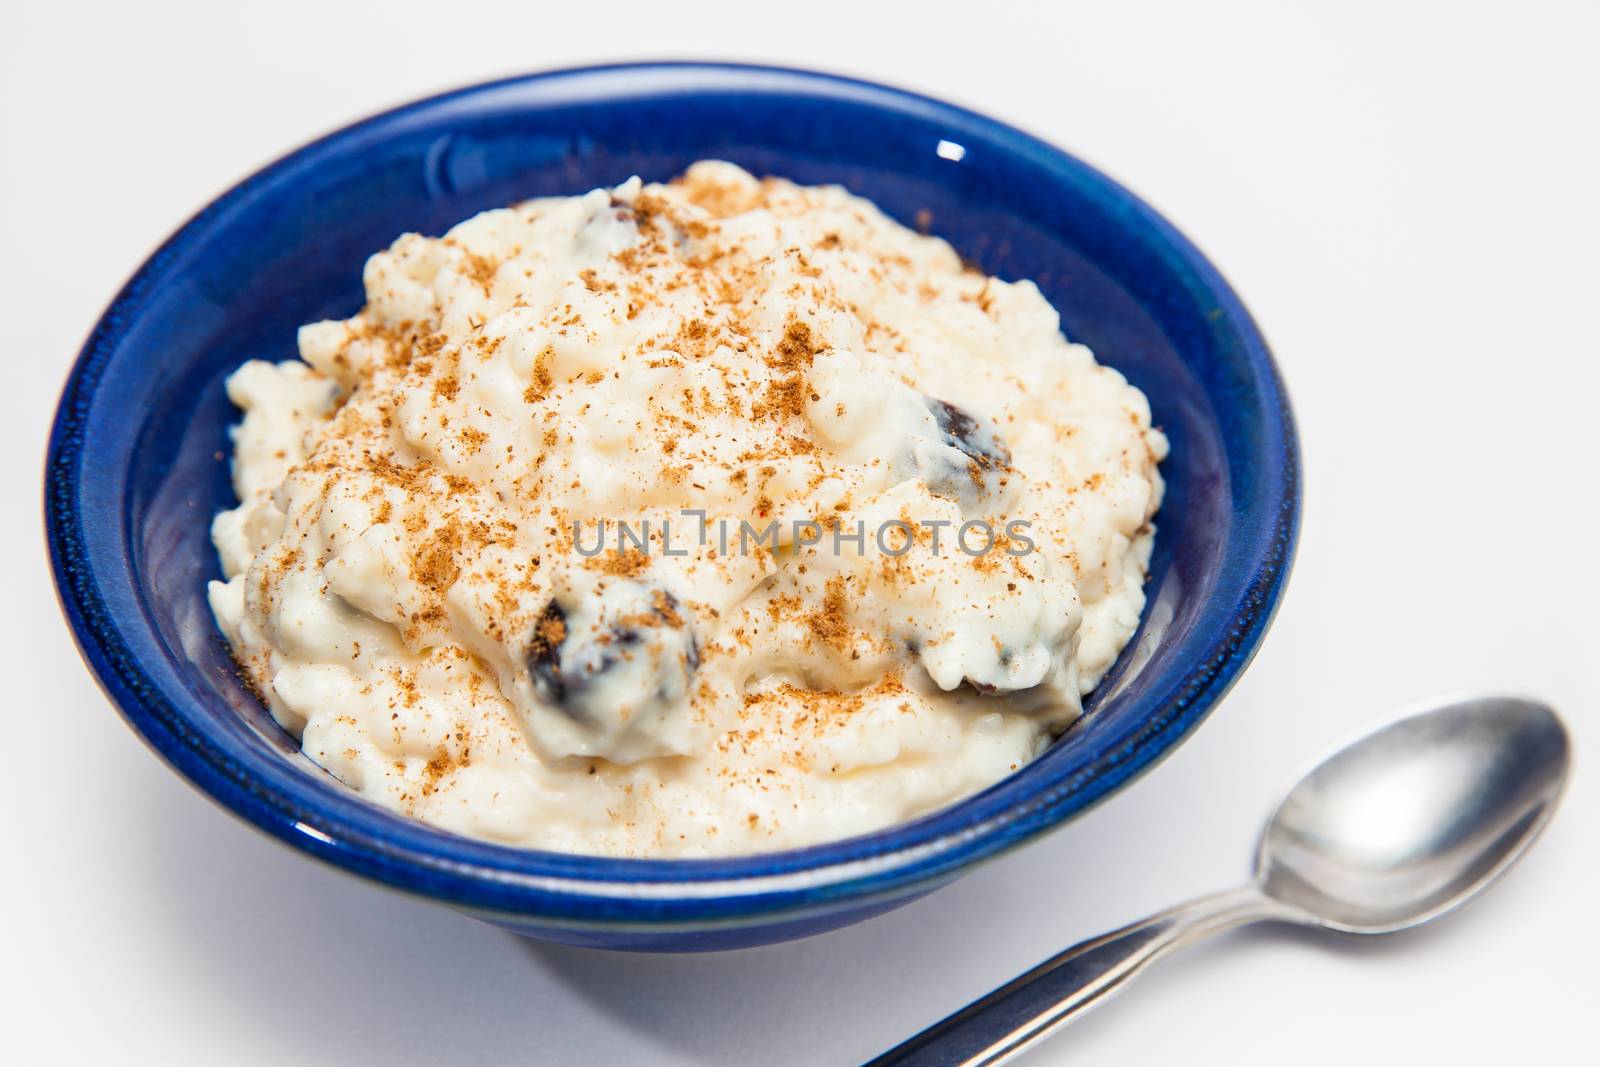 Rice Pudding with cinnamon and raisins preparation : Ready served sweet rice pudding